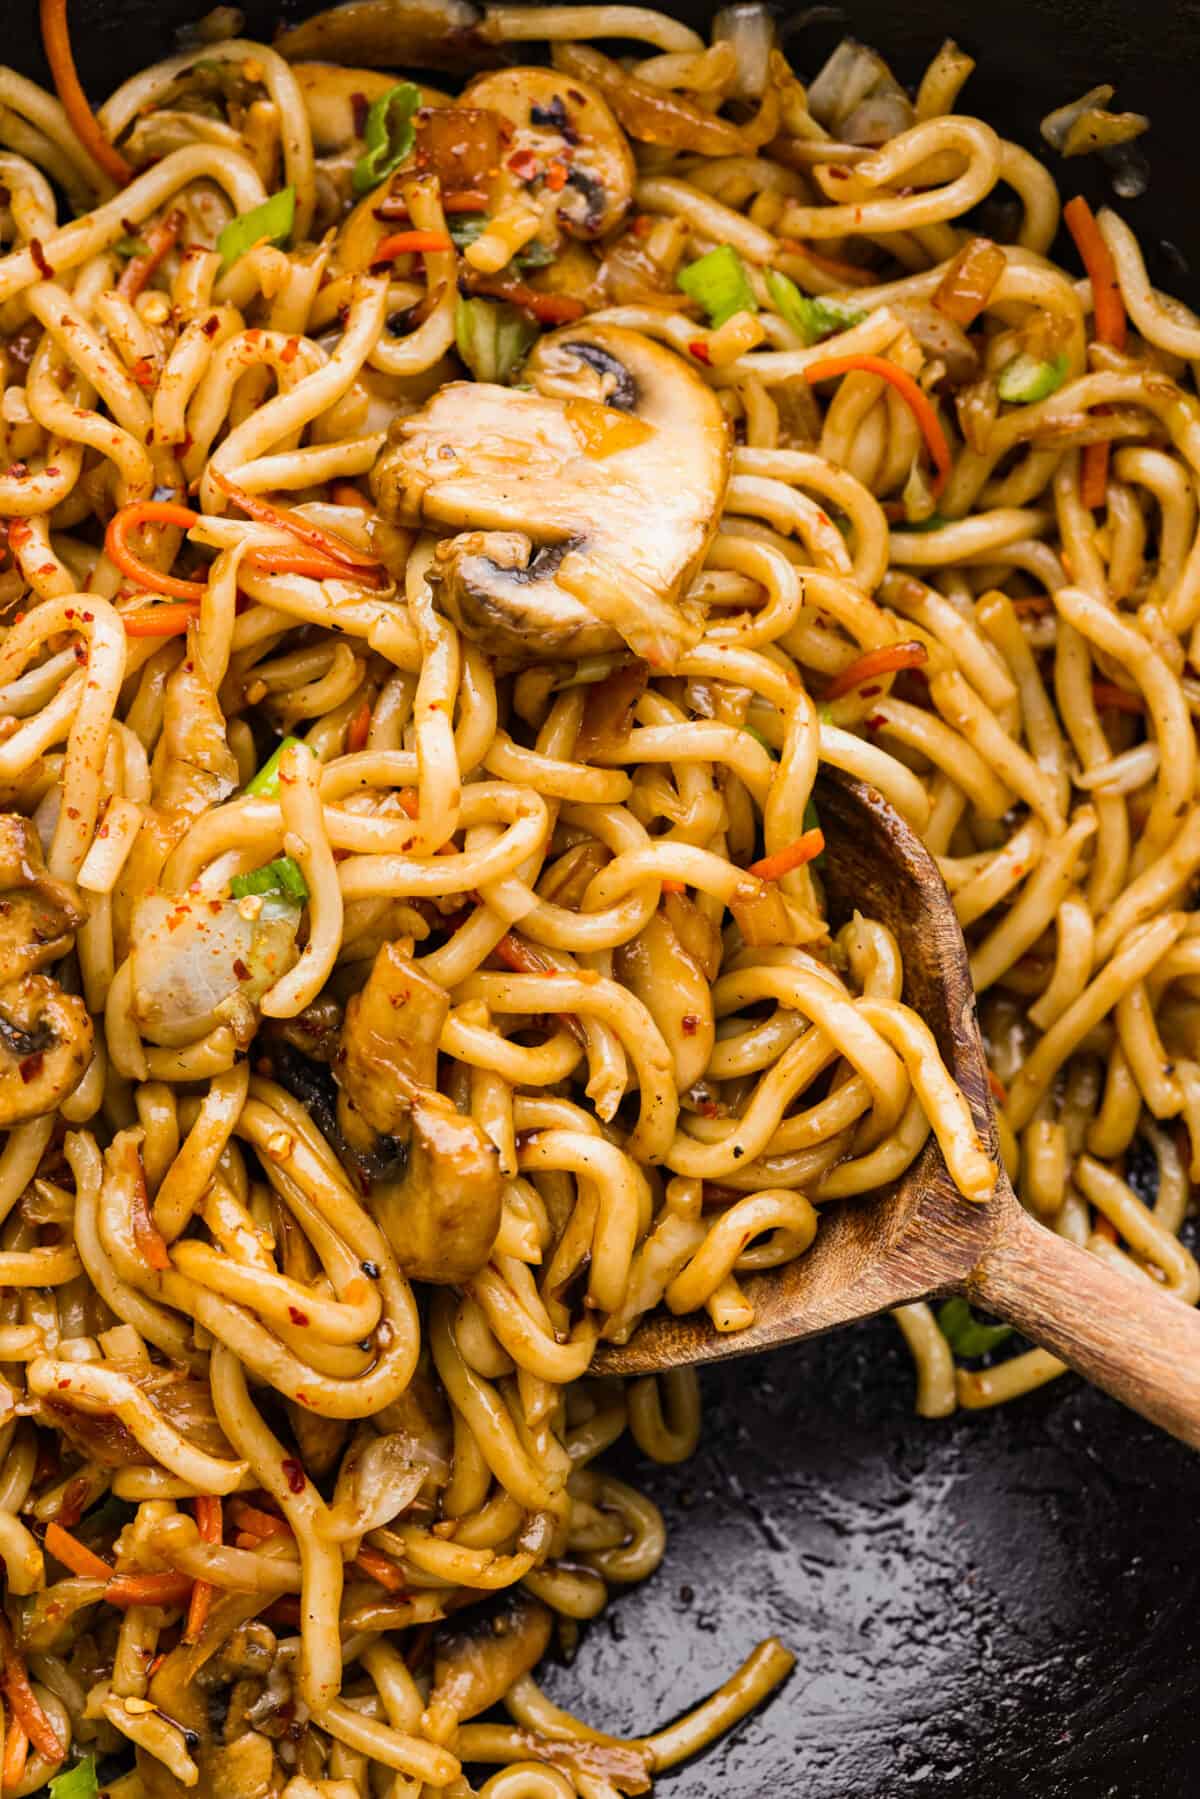 Close view of noodles in a wok with a wood spoon lifting up noodles.